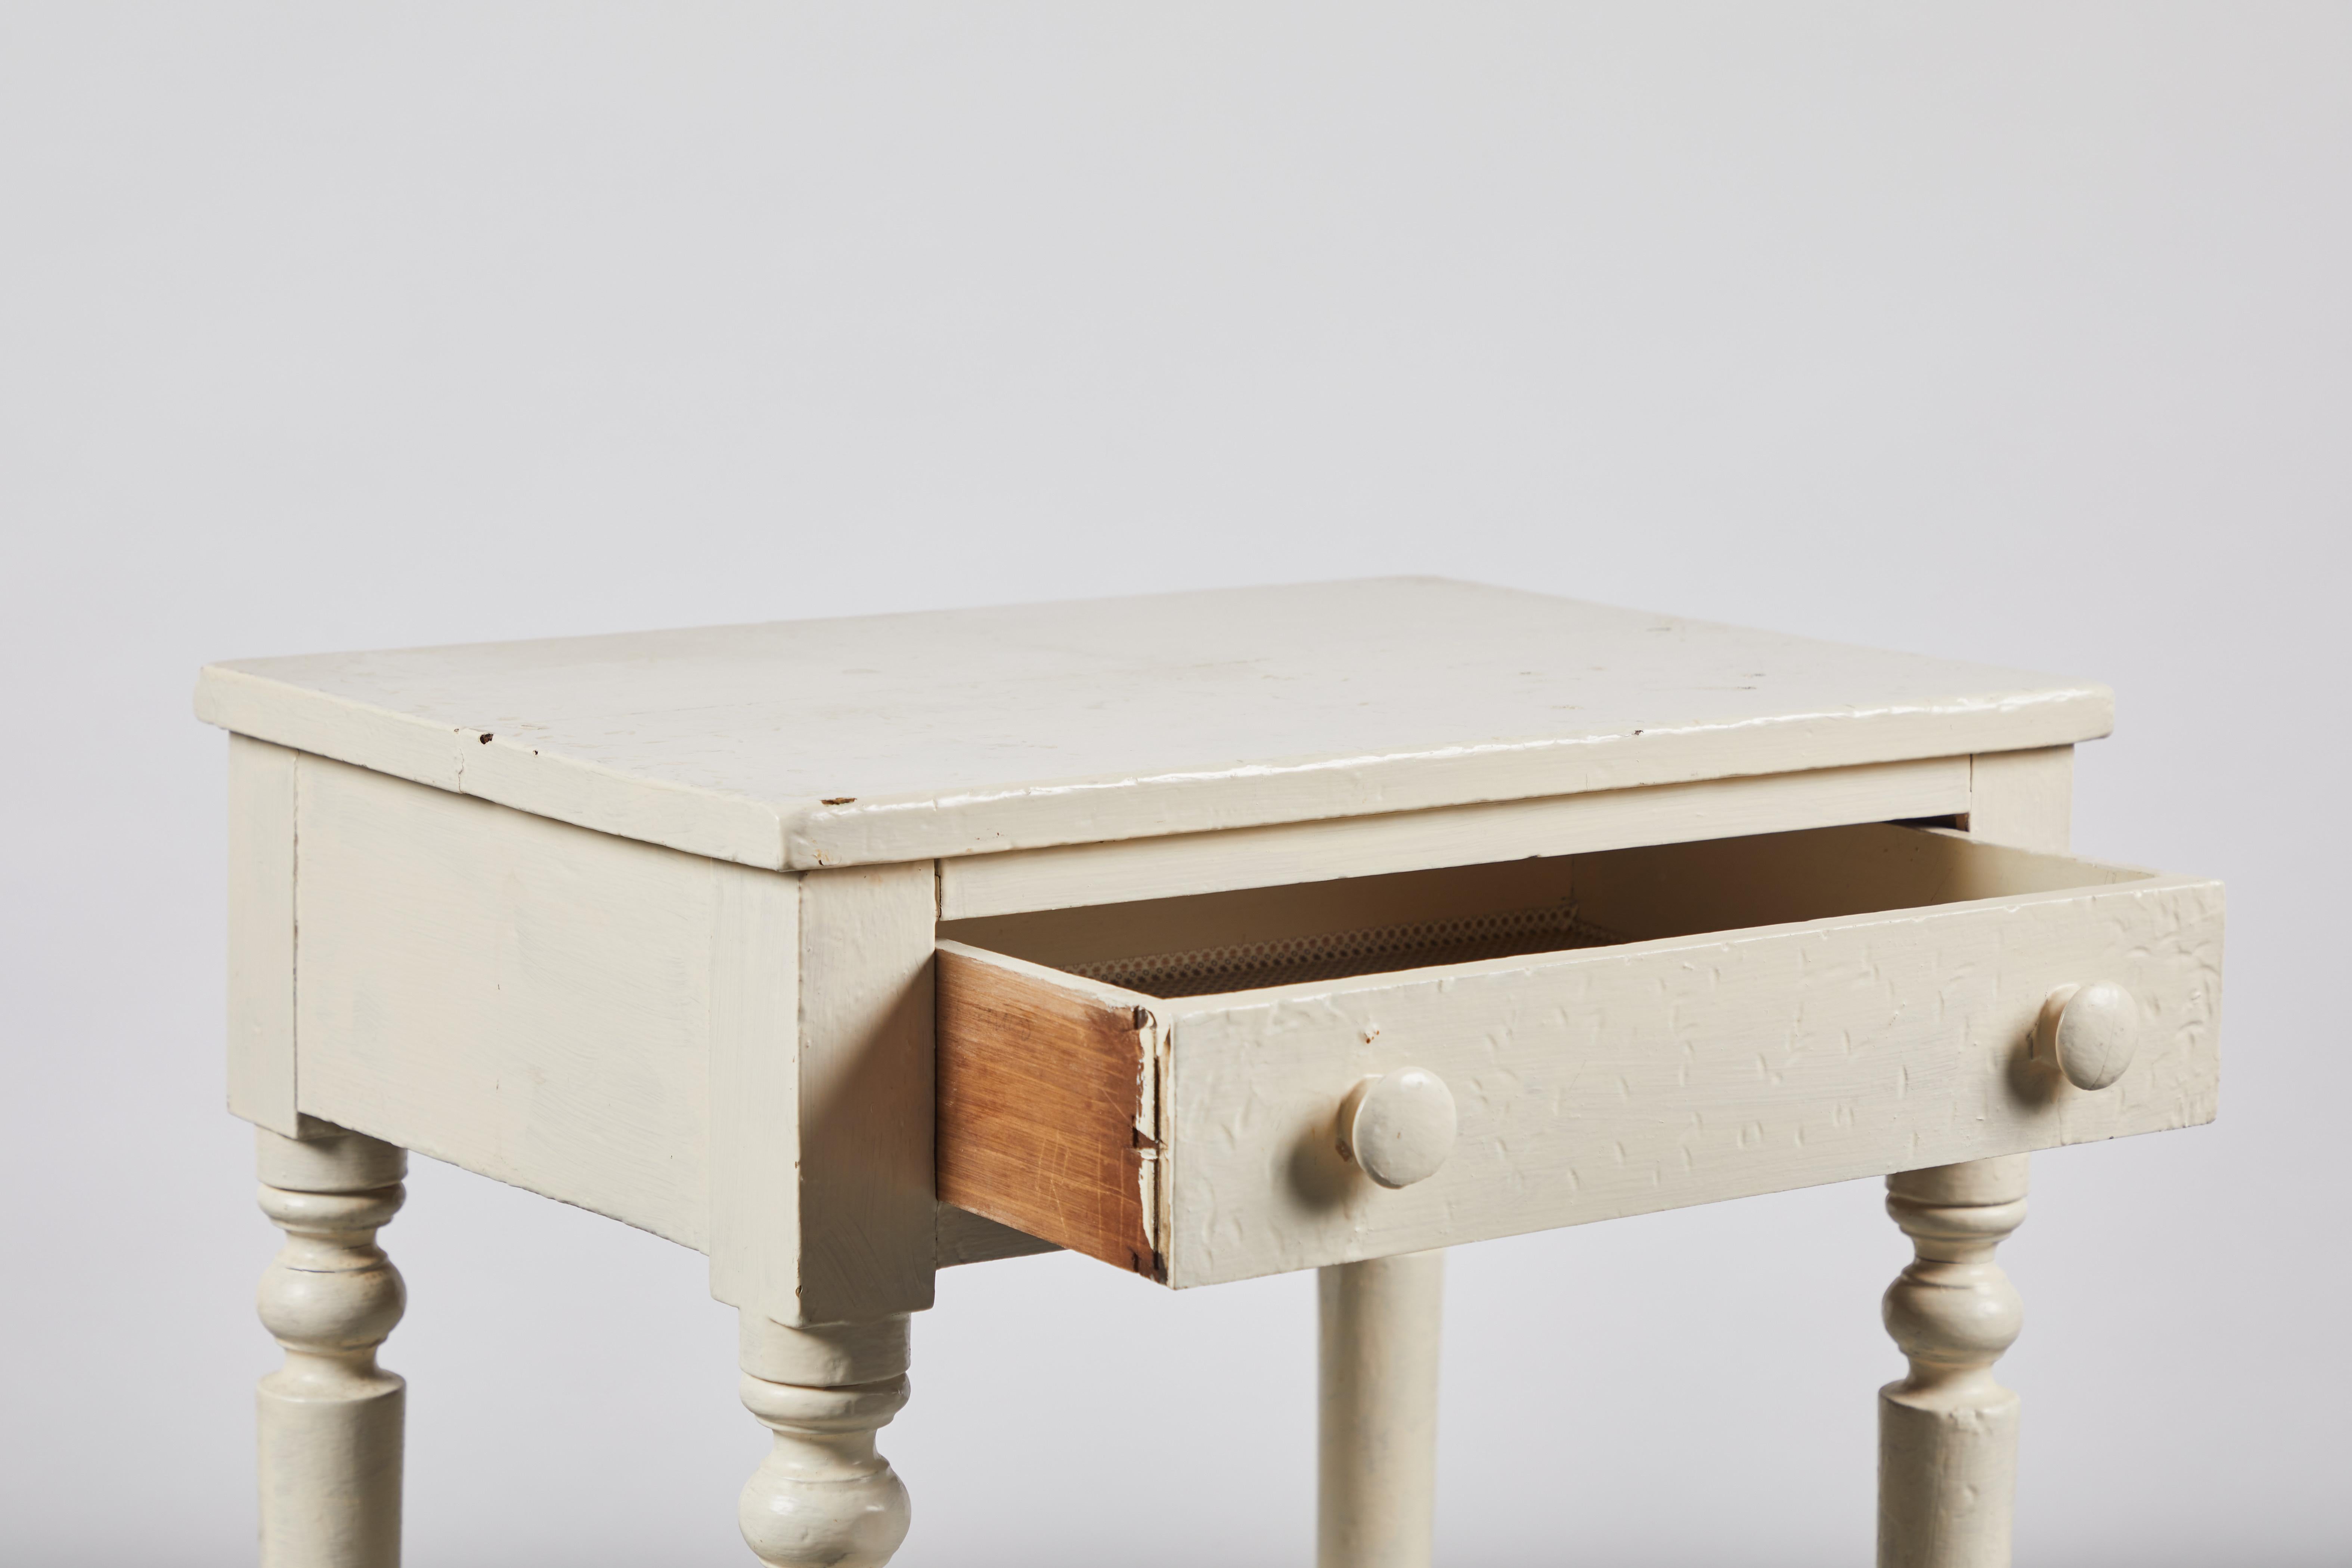 Early American white painted side table with turned legs and a single drawer.